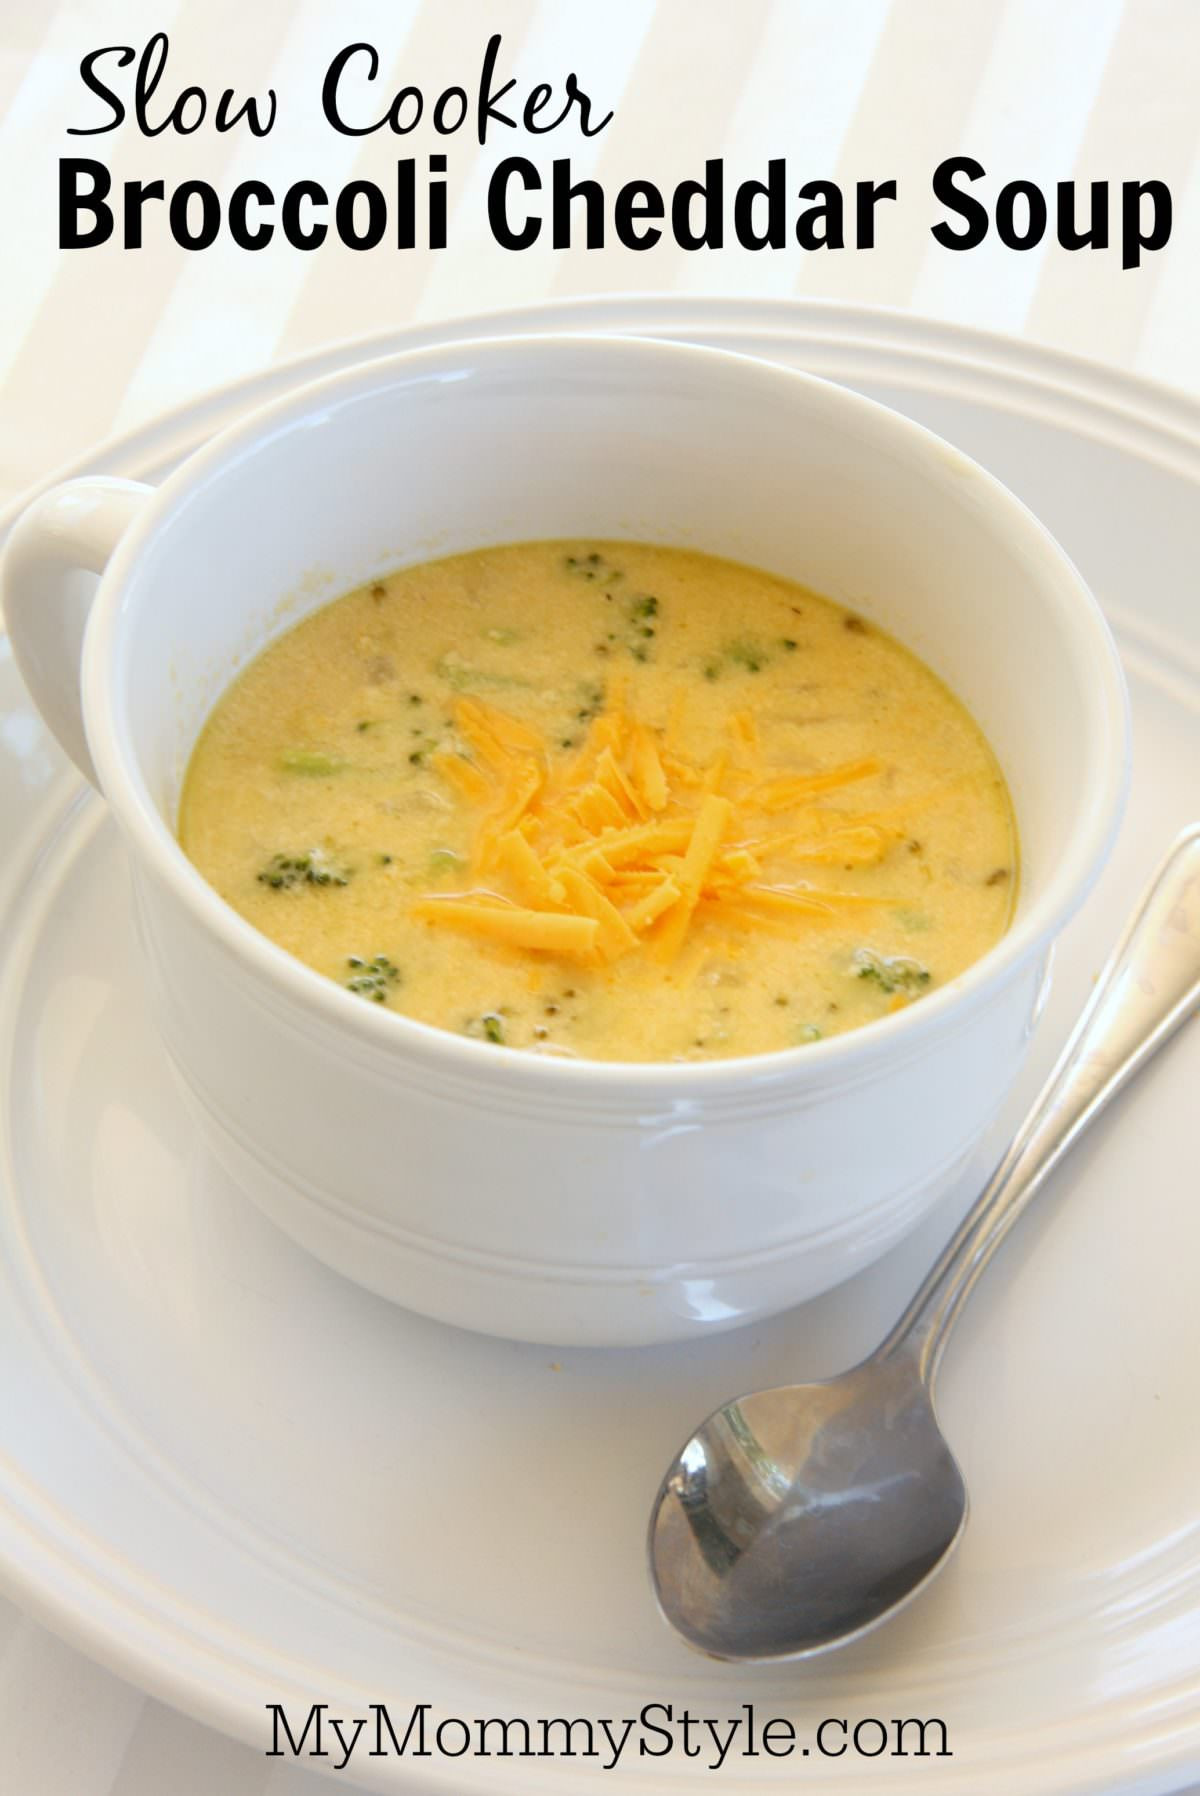 Slow Cooker Broccoli Cheddar Soup
 Slow Cooker Broccoli Cheese Soup My Mommy Style